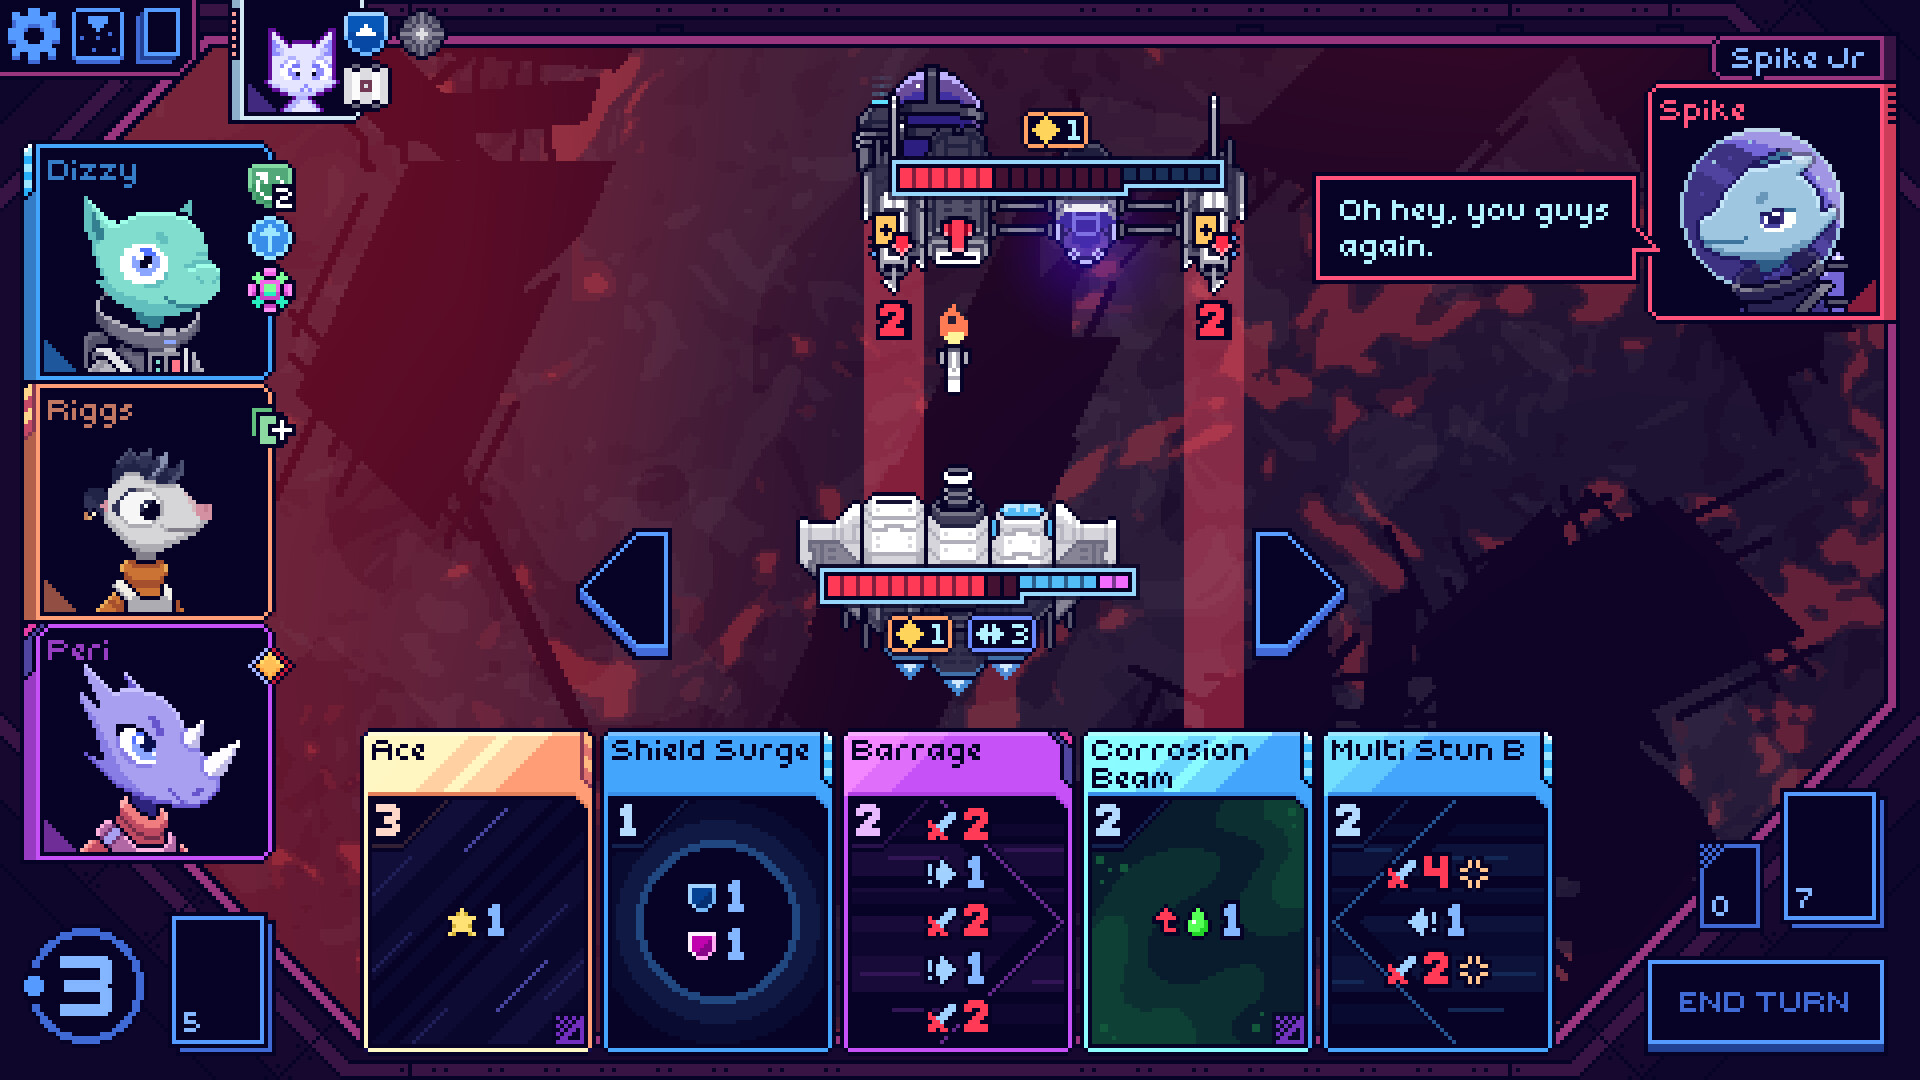 A screenshot from "Cobalt Core:" on the left, three profiles of animal characters. In the center, two spaceships engaged in combat. Beneath the spaceships is a row of cards